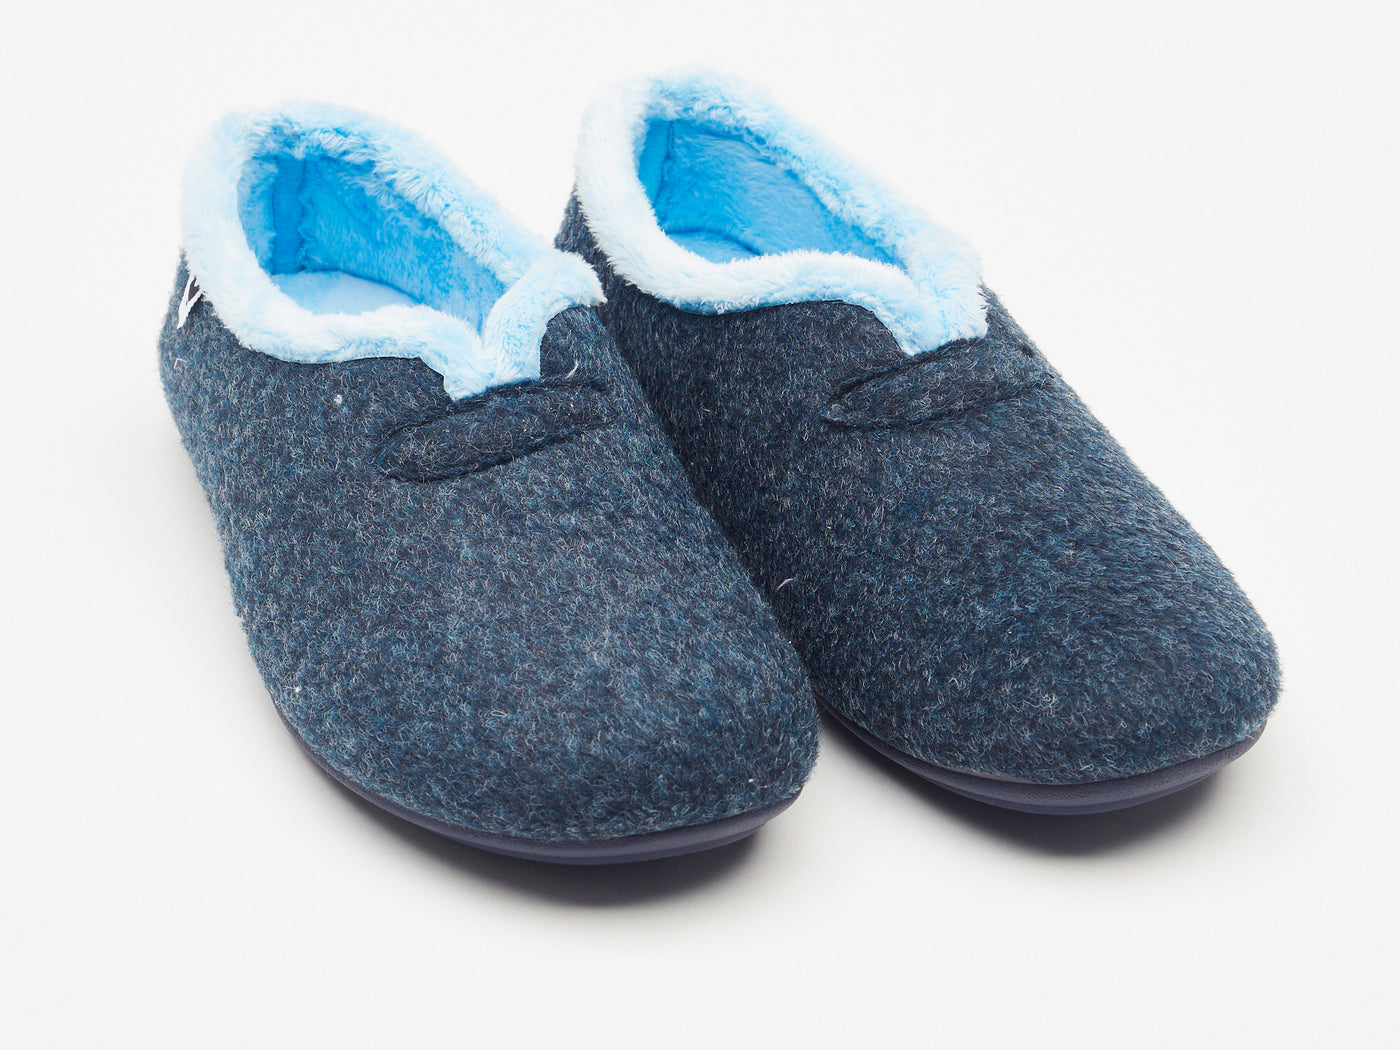 Women's navy blue felt and faux fur slippers